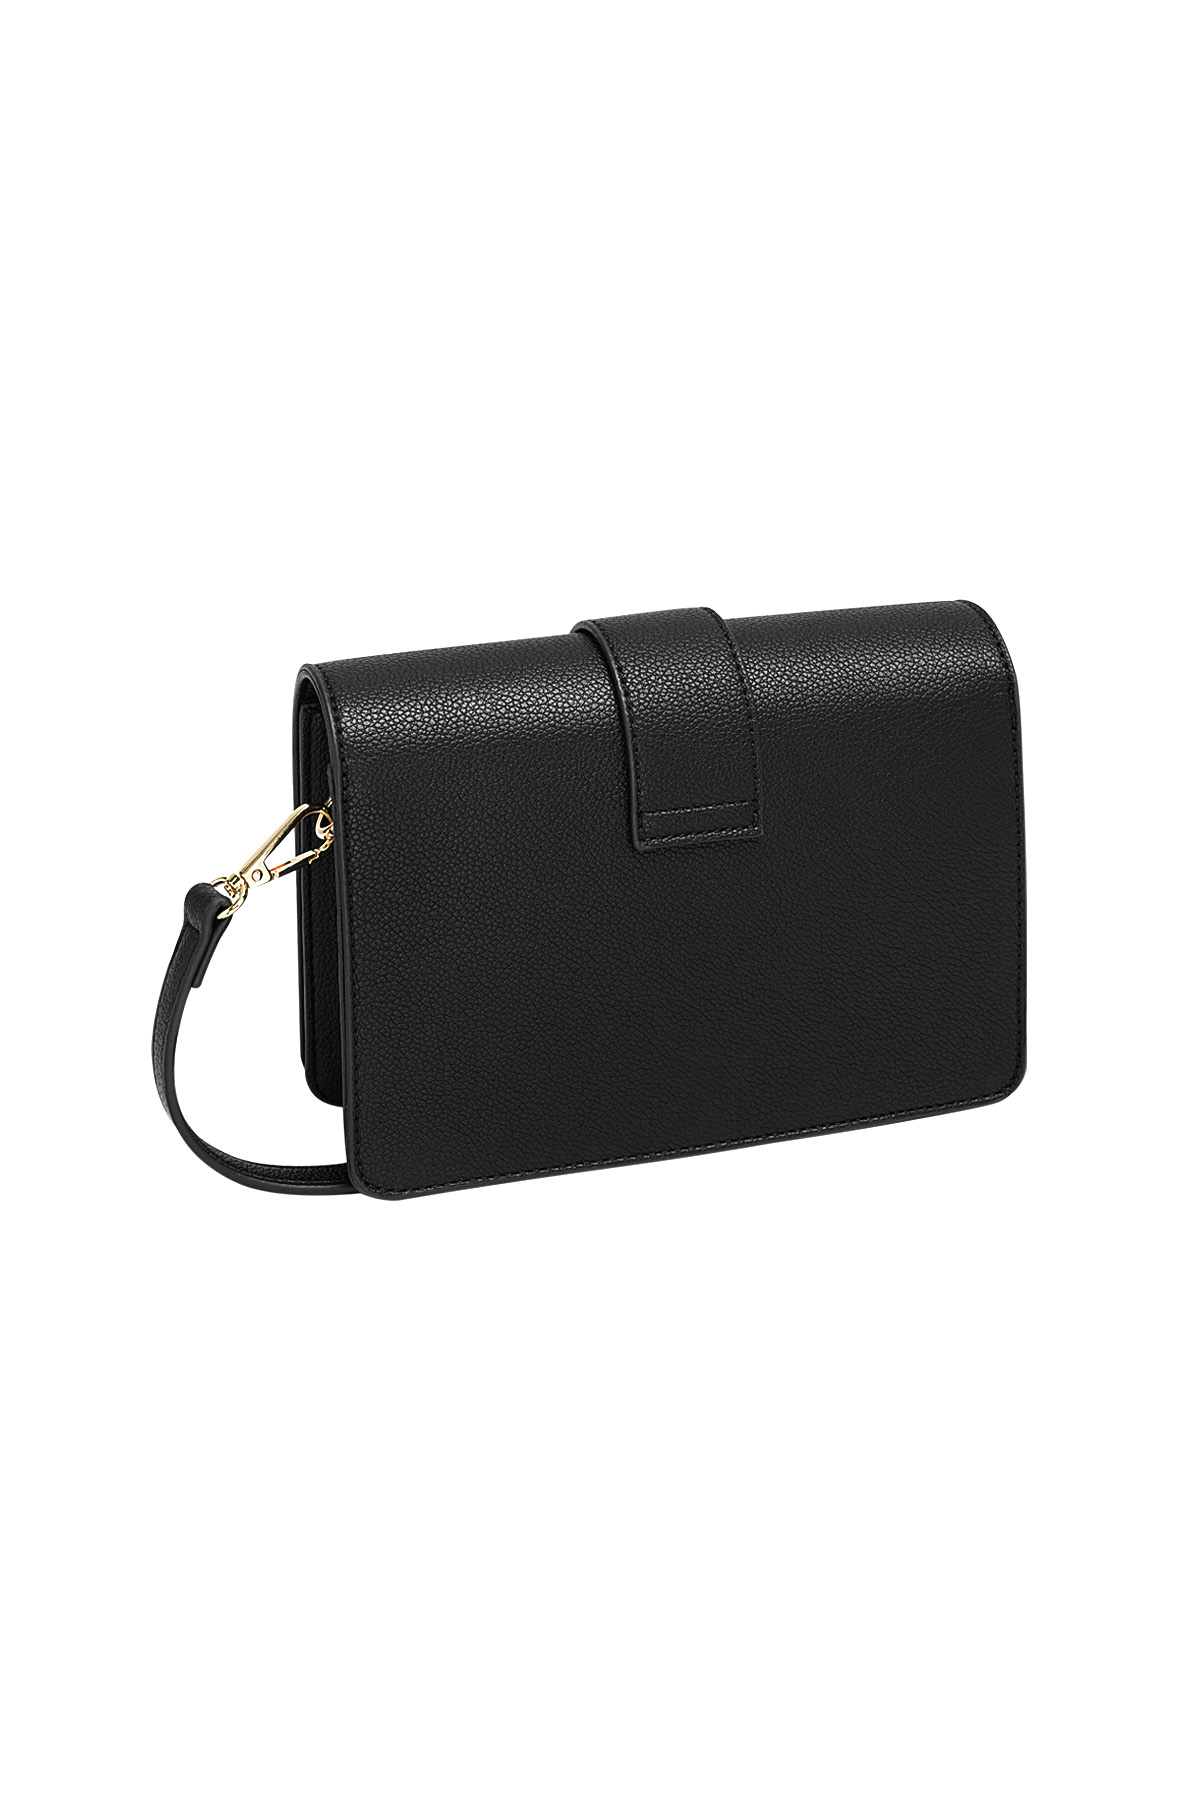 Bag buckle classy - black Picture4